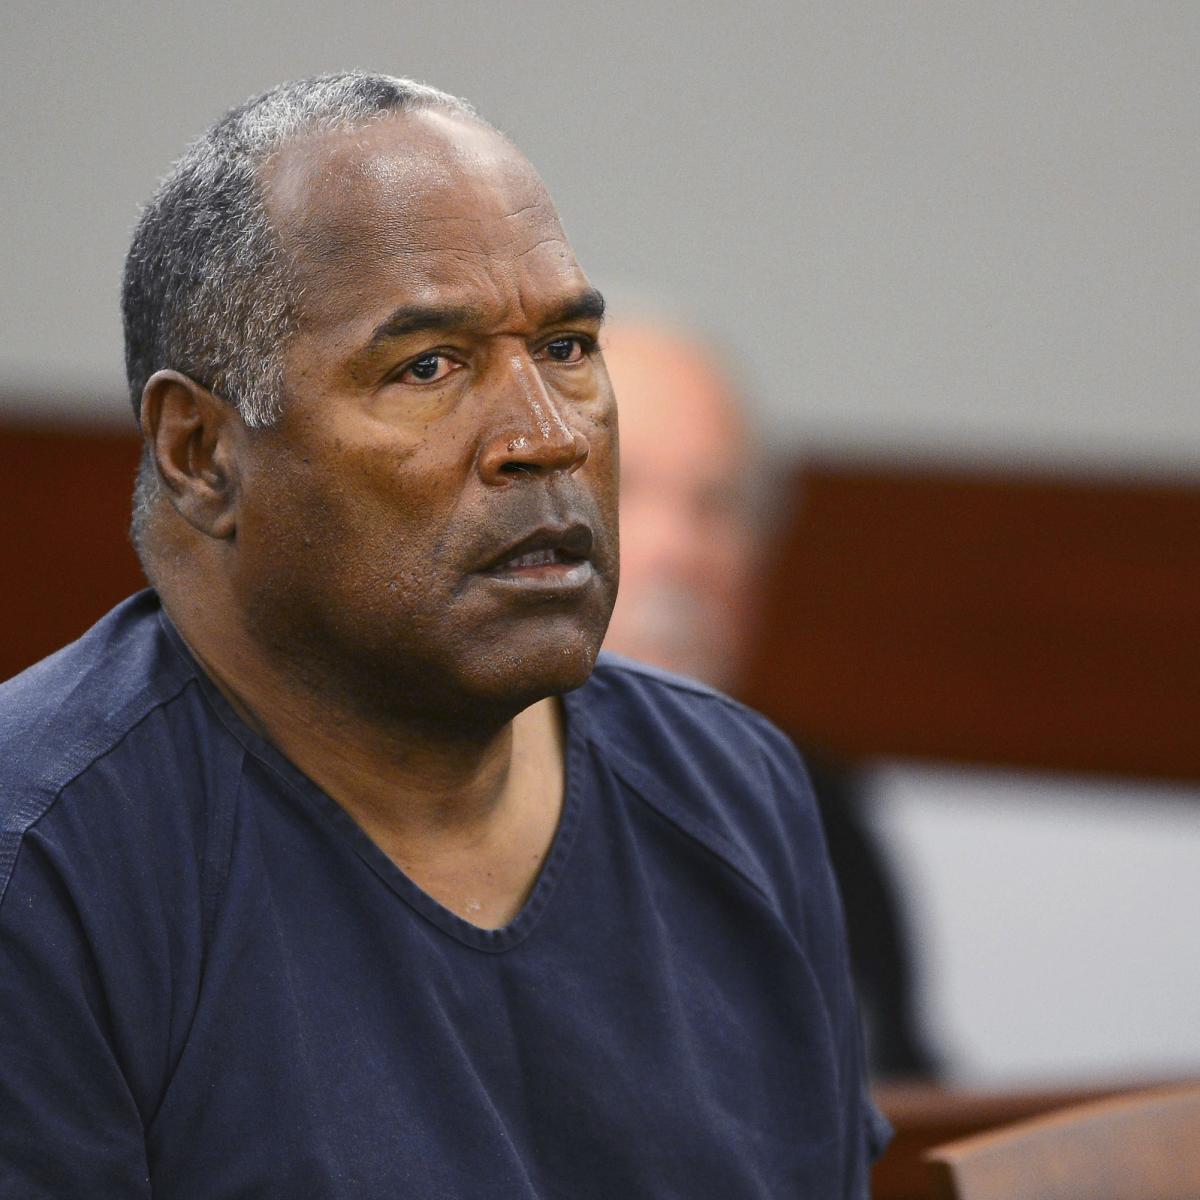 Fred Goldman Says O.J. Simpson Has Only Paid $133K in Wrongful Death ...